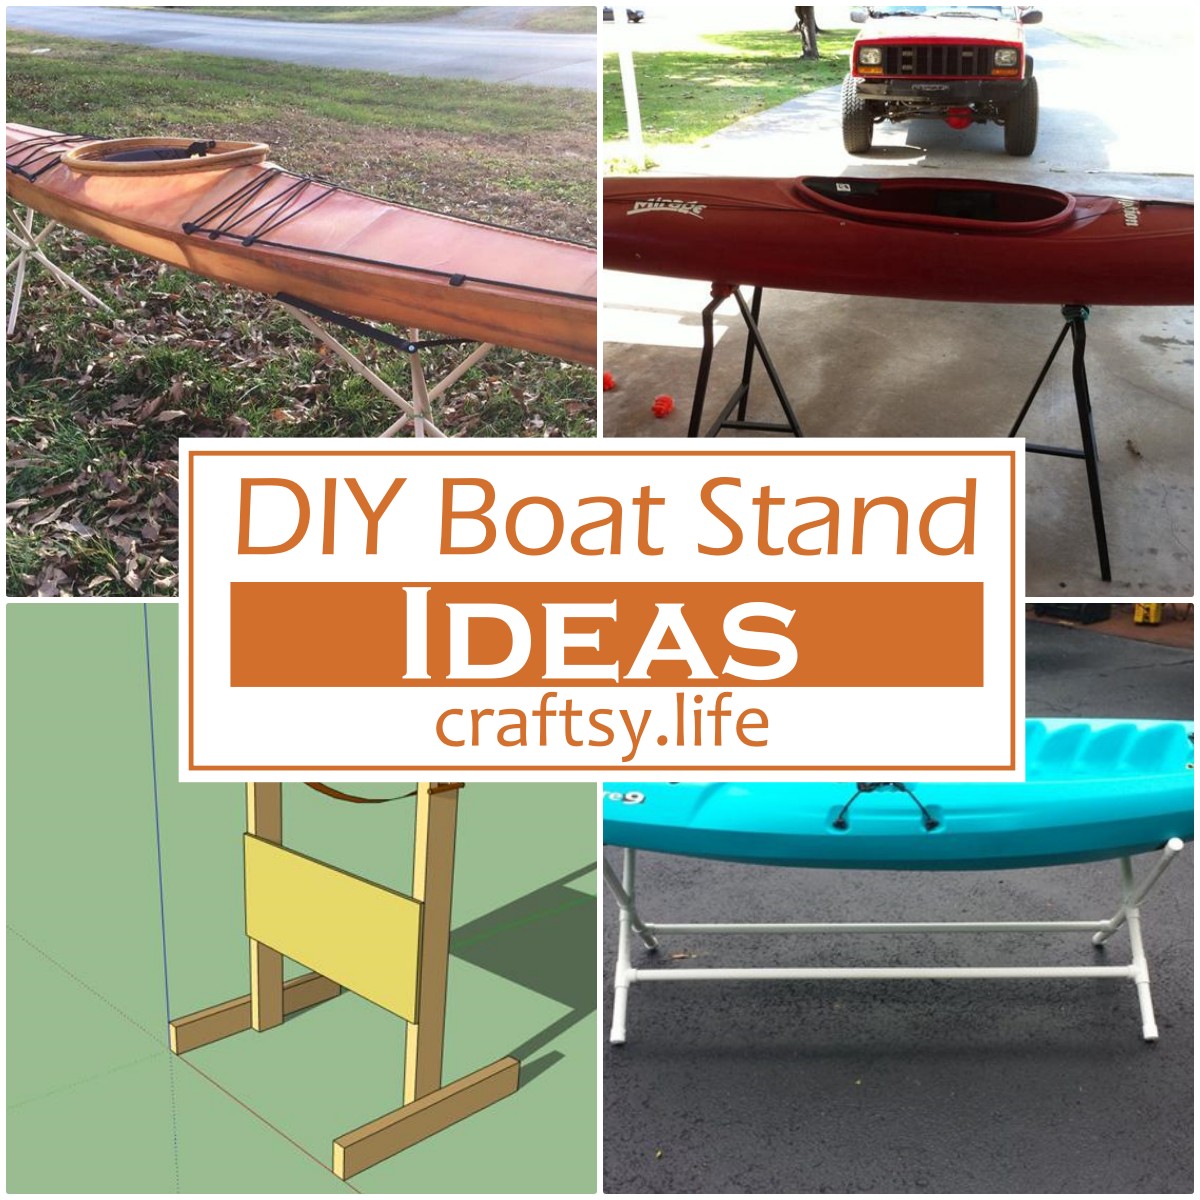 DIY Boat Stand Ideas